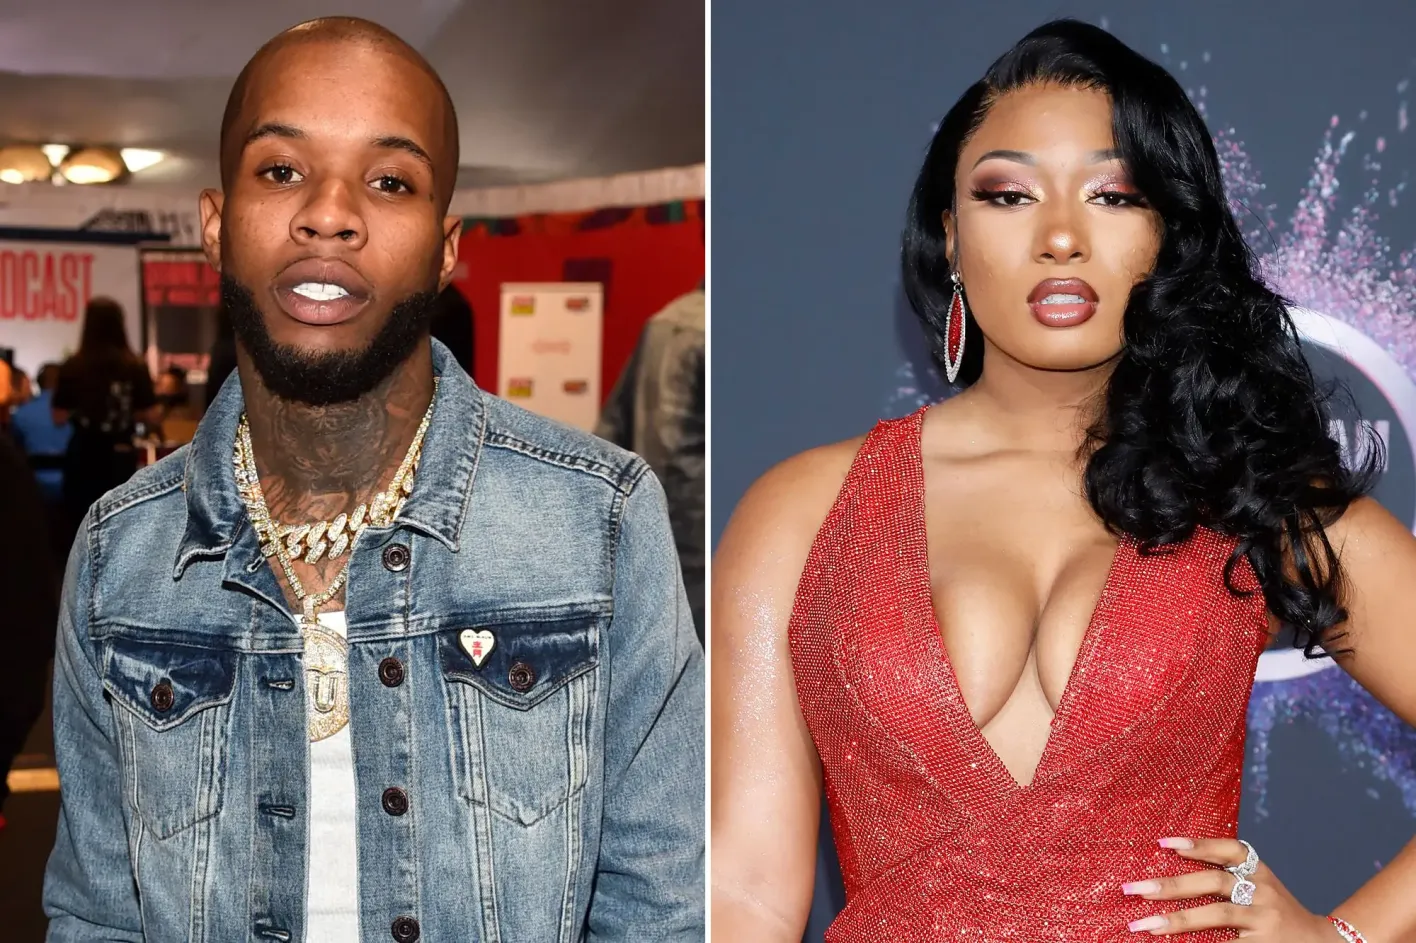 Megan Thee Stallion accuses Tory Lanez of offering her over R15m